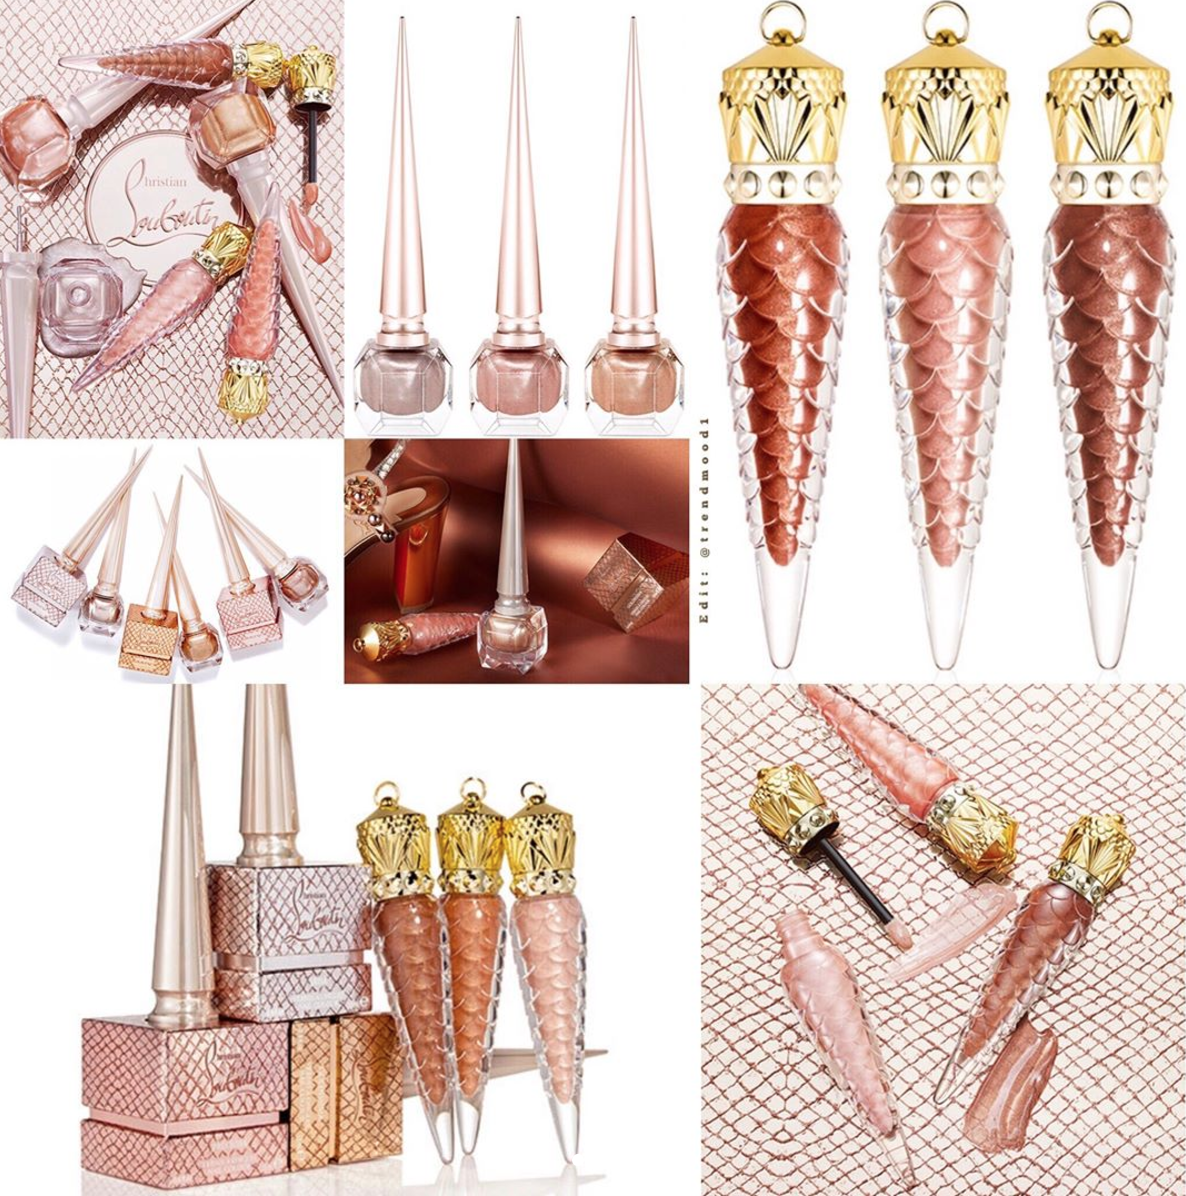 Christian Louboutin Metalinudes Review and Swatches - The Beauty Look Book